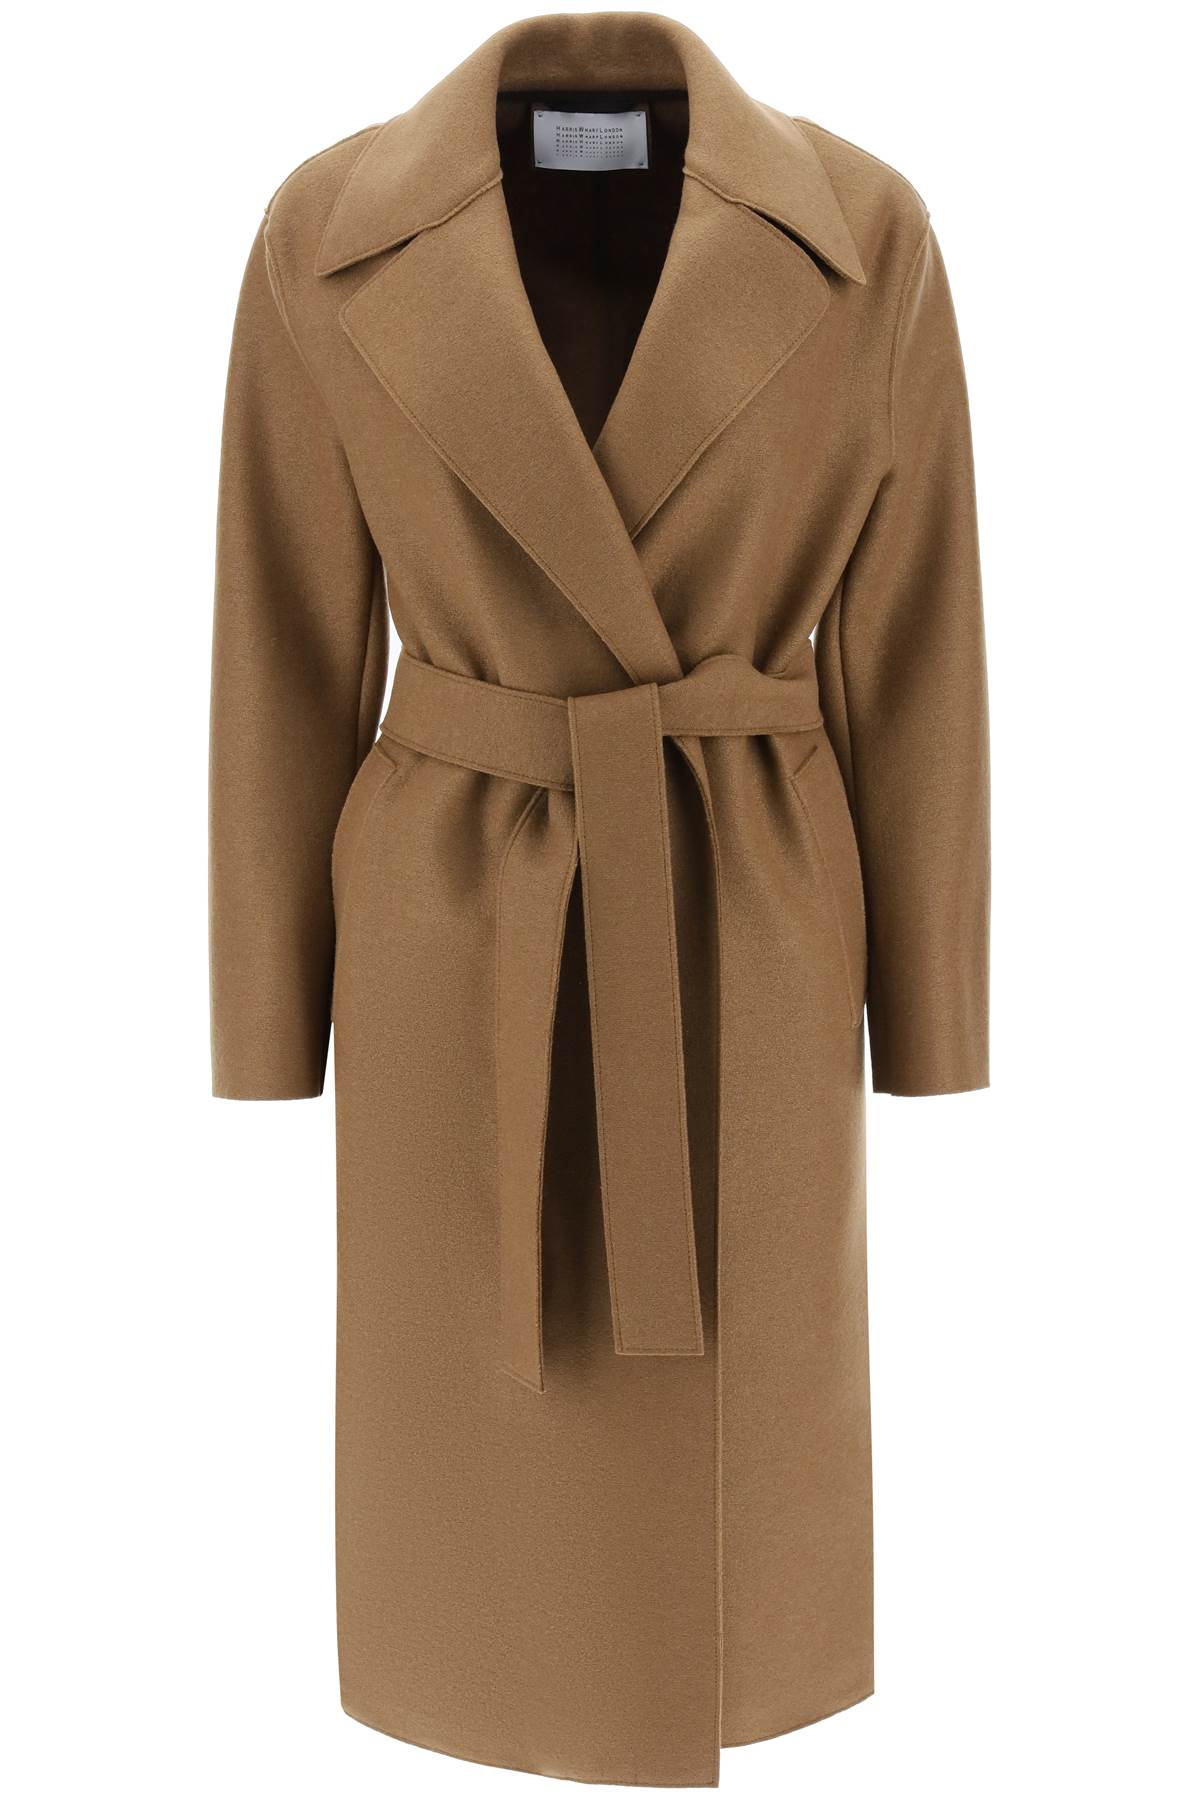 Harris wharf london long robe coat in pressed wool and polaire-0